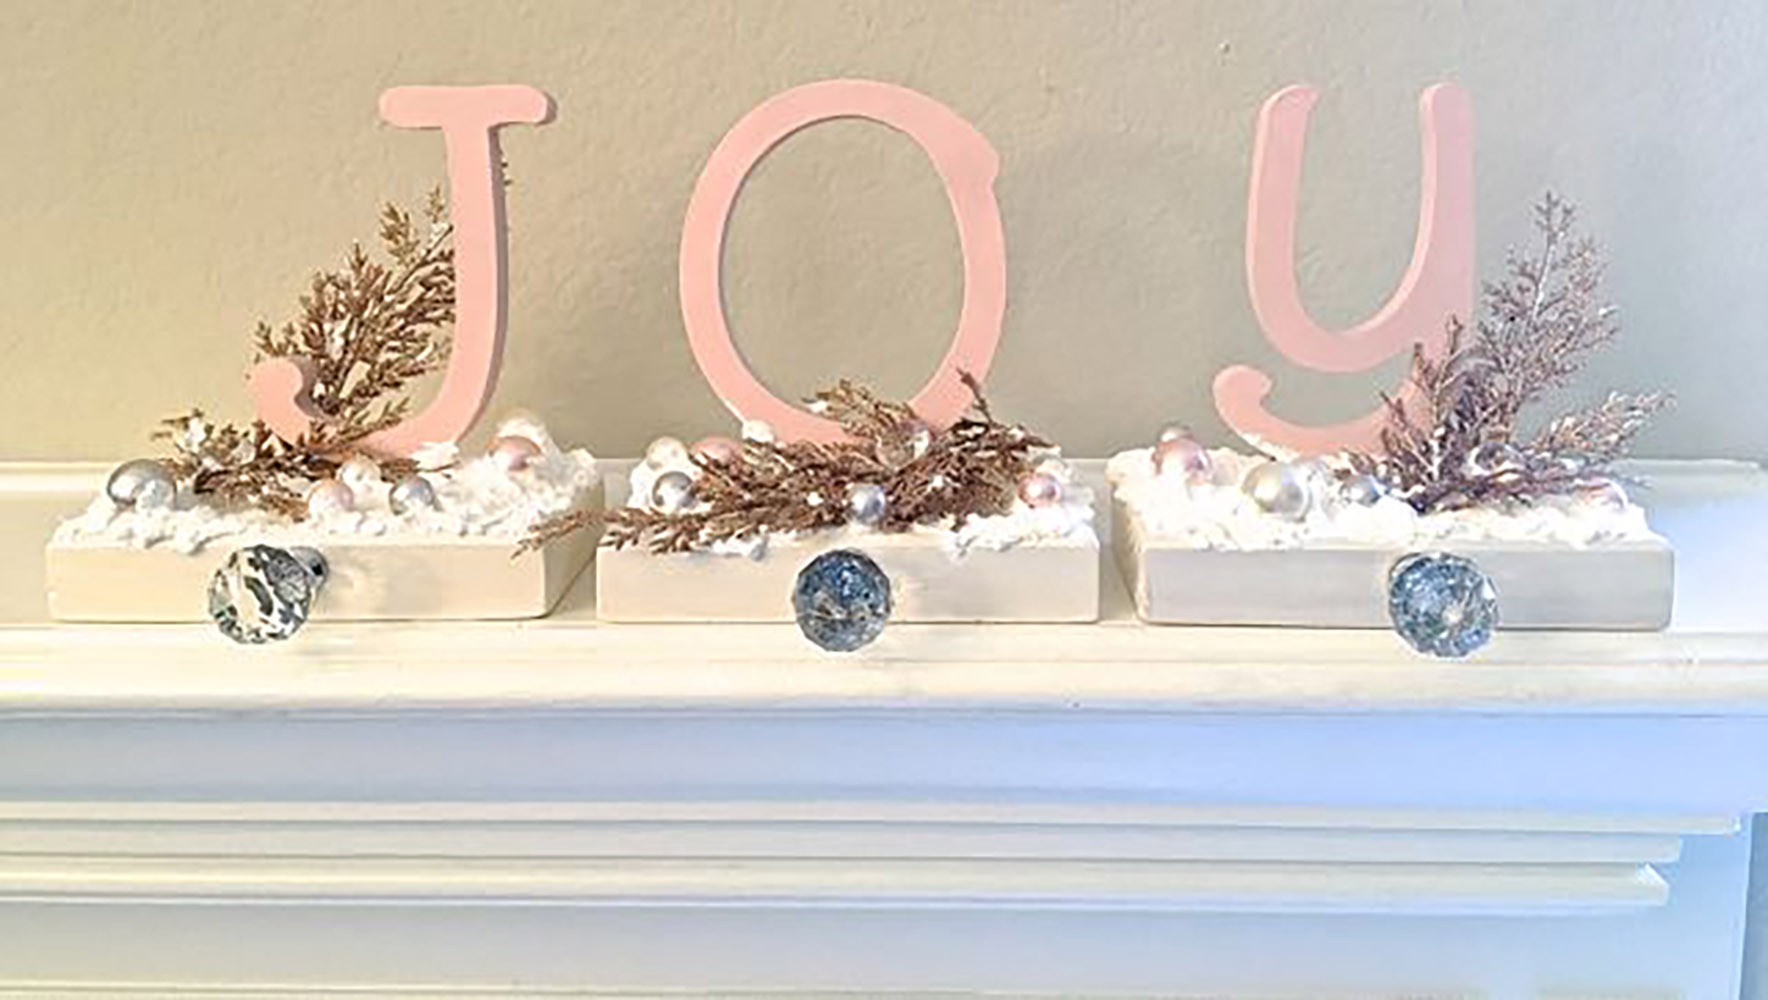 Three stocking holders that spell out the word “Joy.”